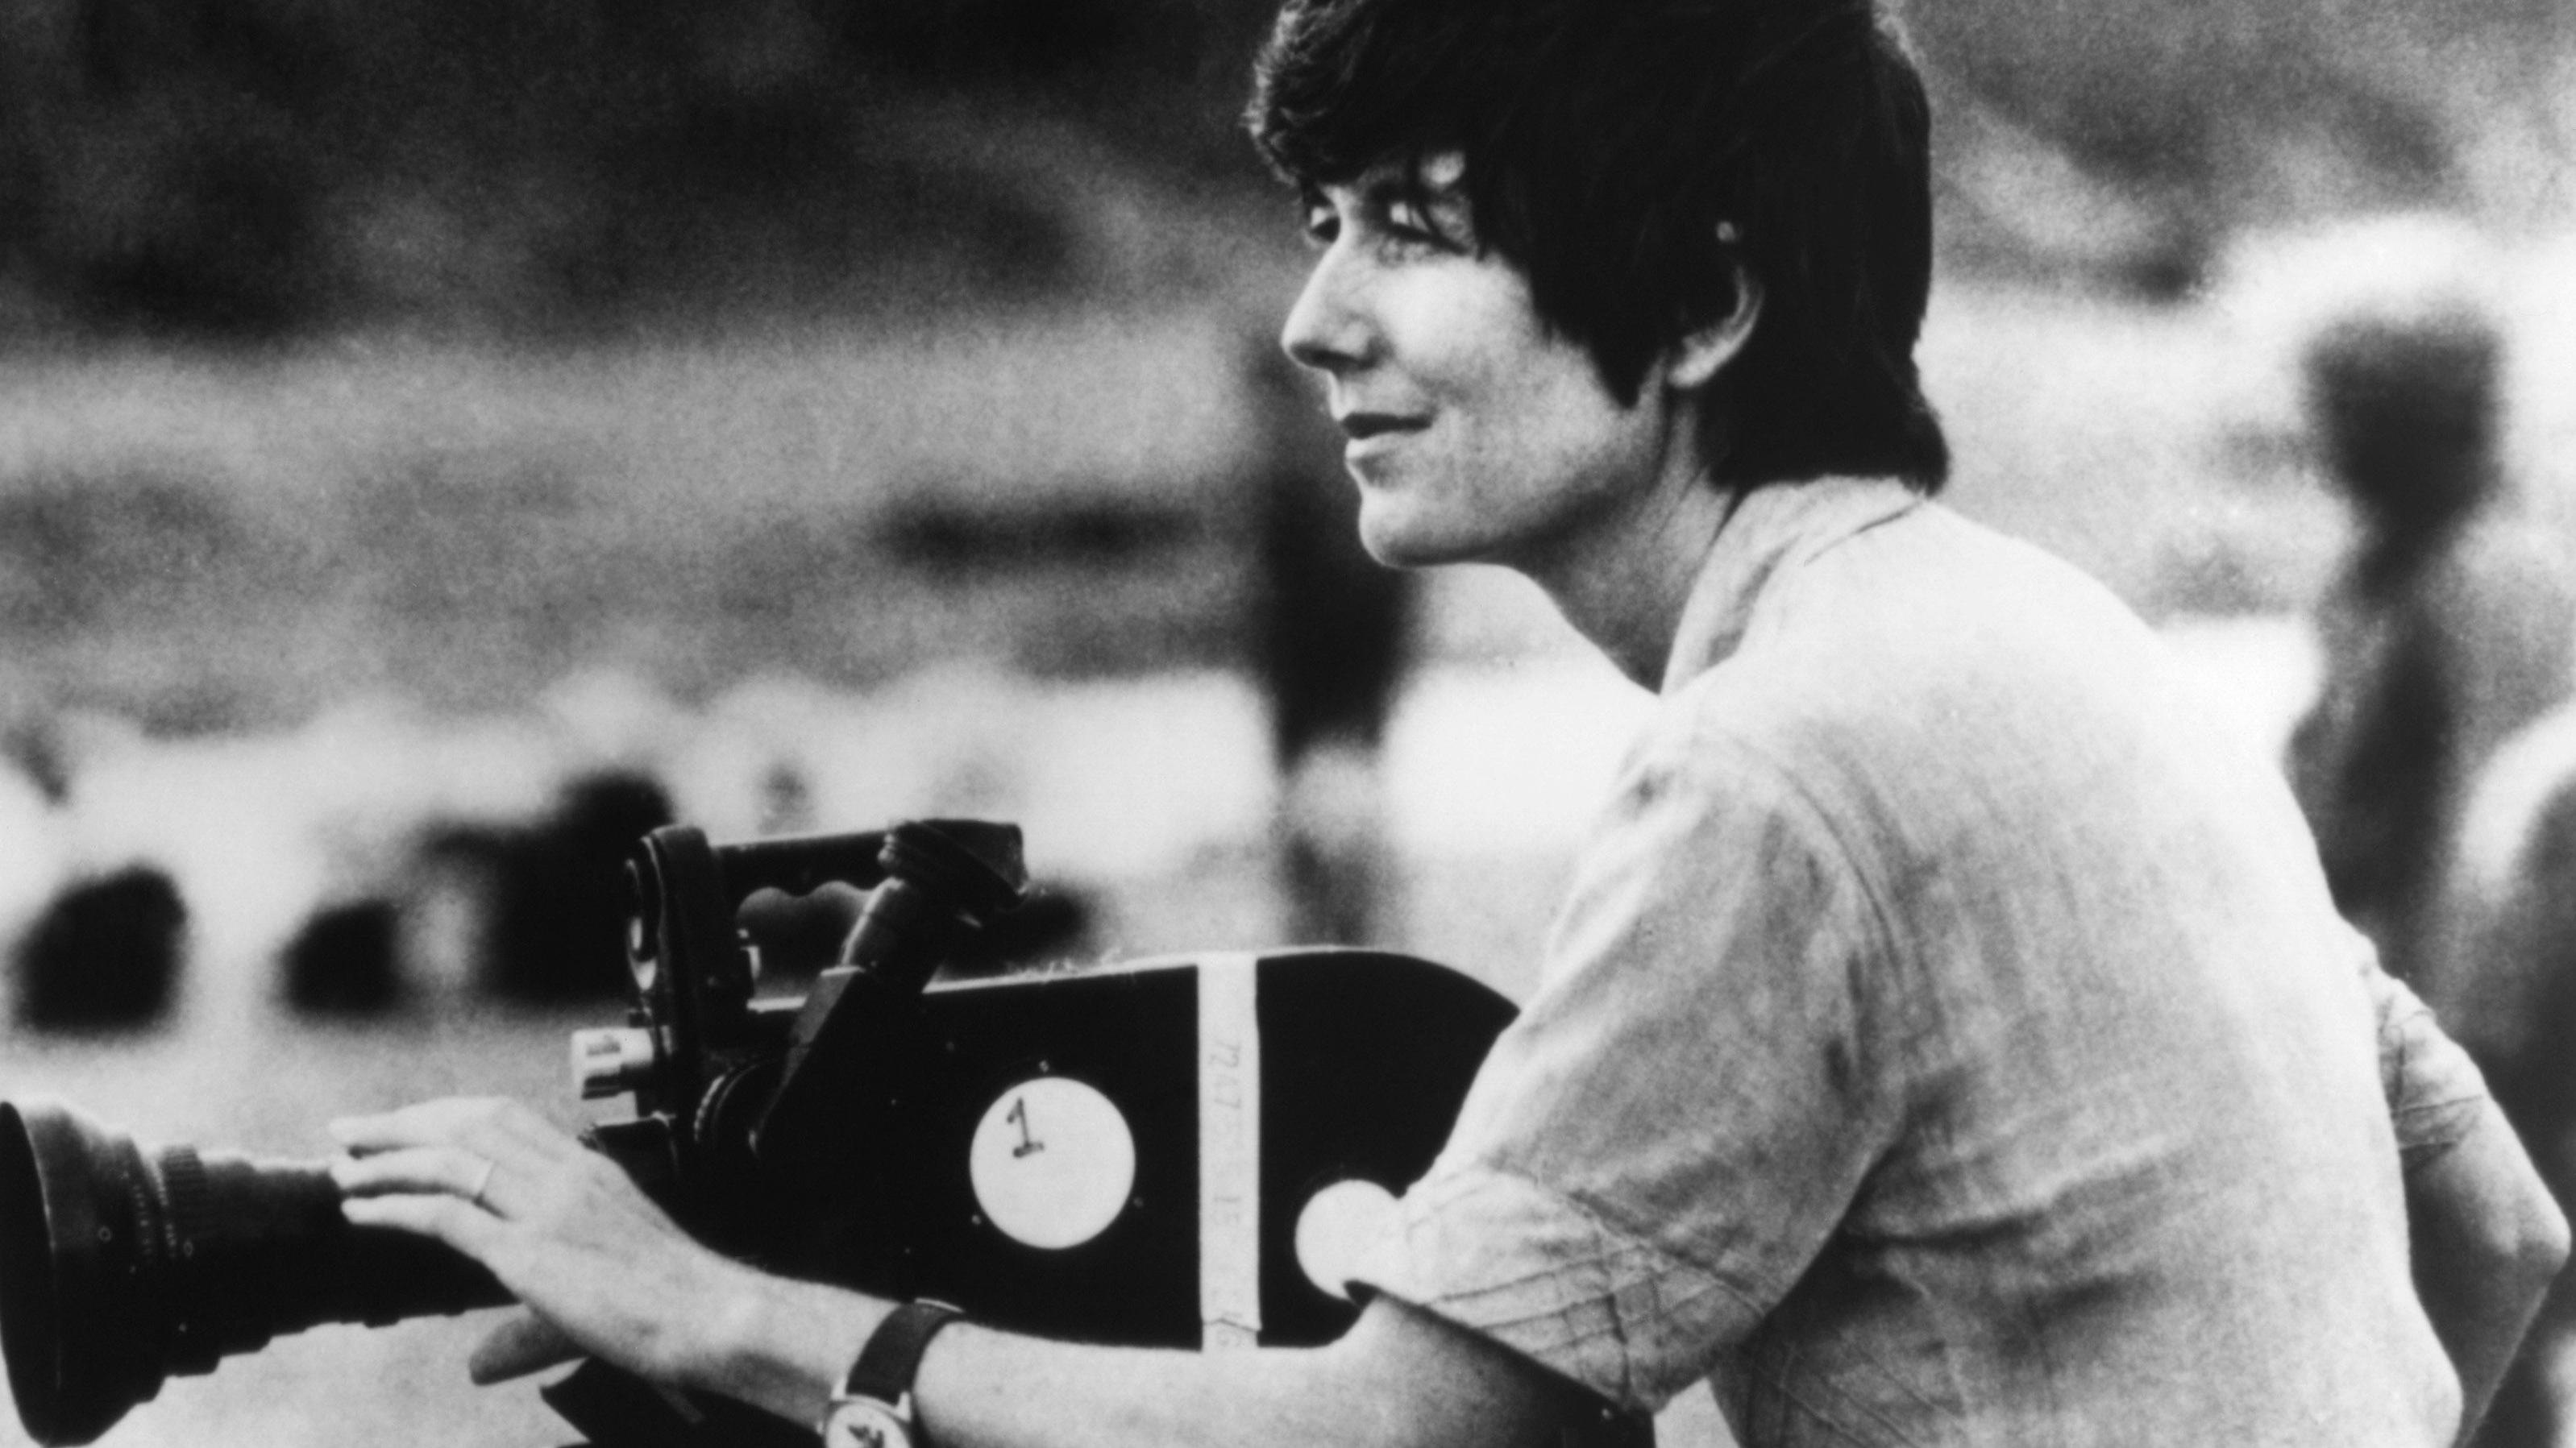 Eleanor Coppola filming the making of Apocalypse Now in the Philippines